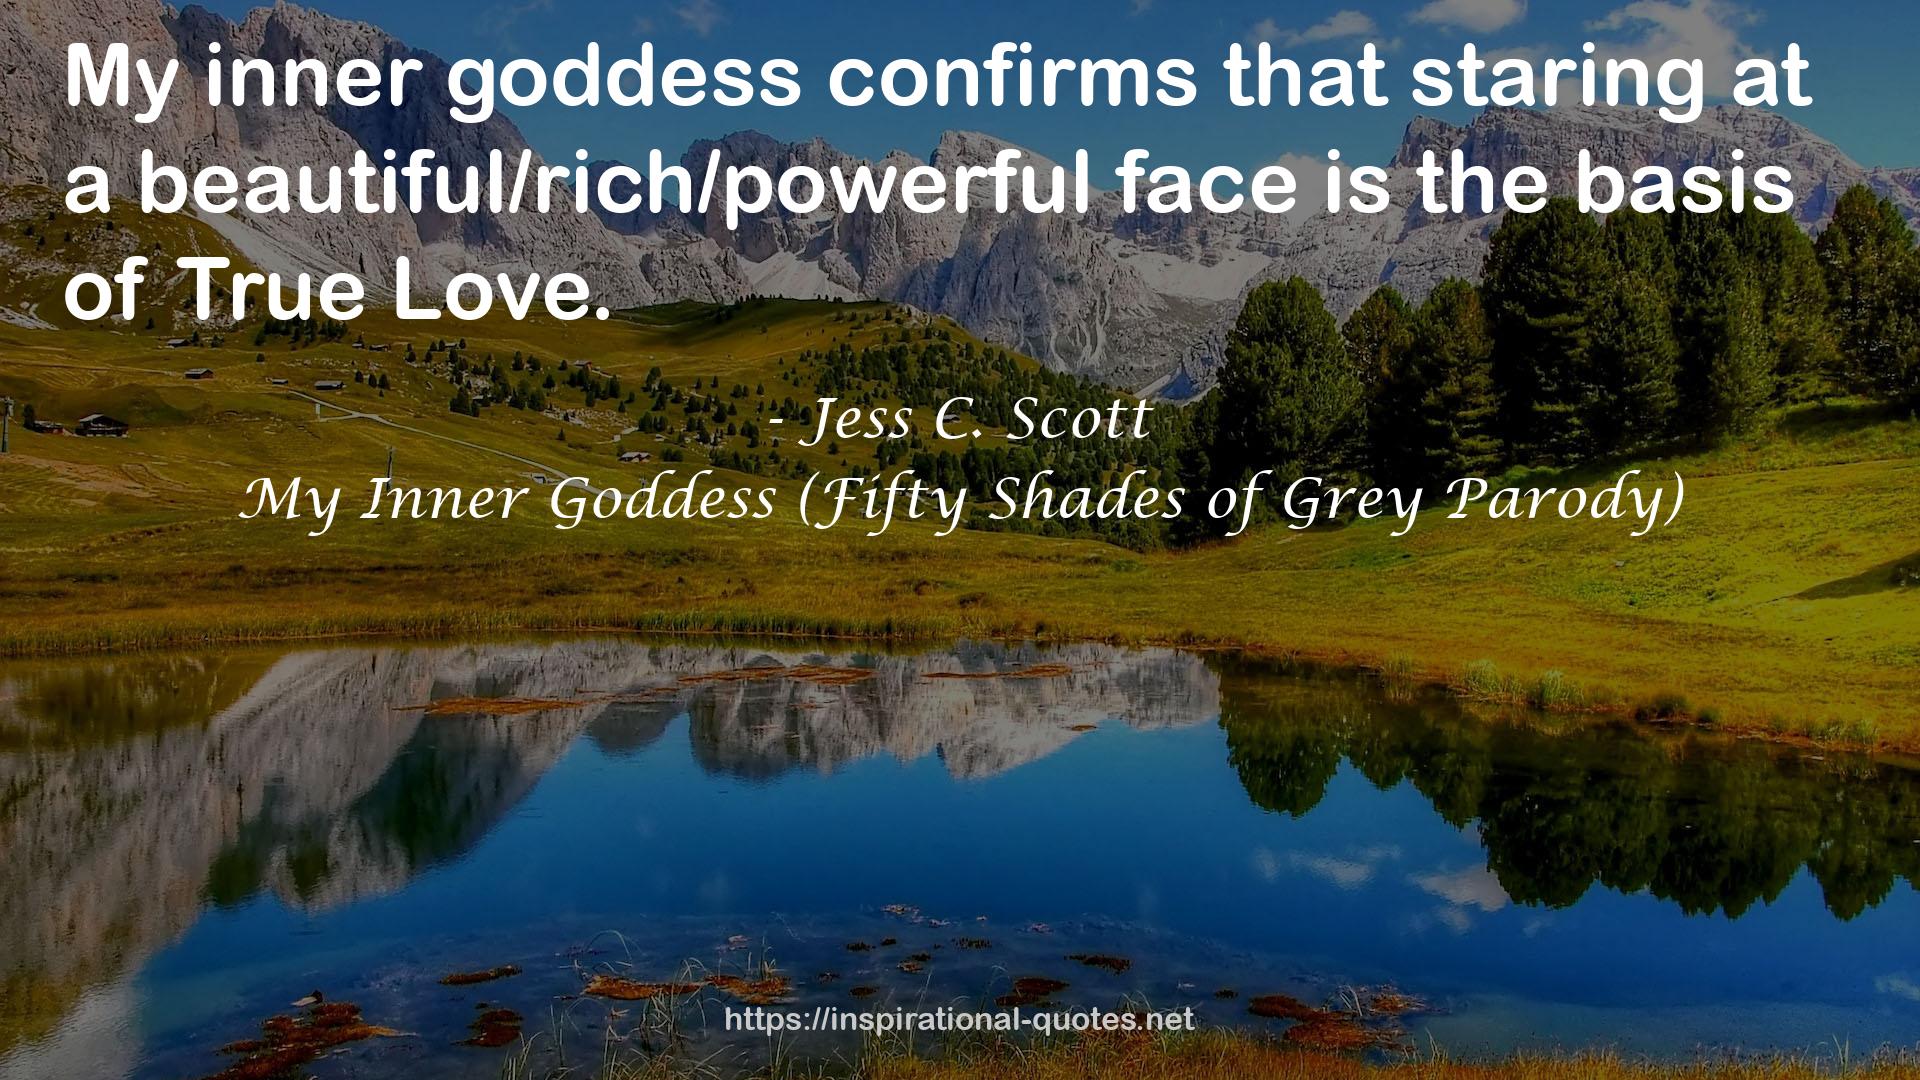 My Inner Goddess (Fifty Shades of Grey Parody) QUOTES